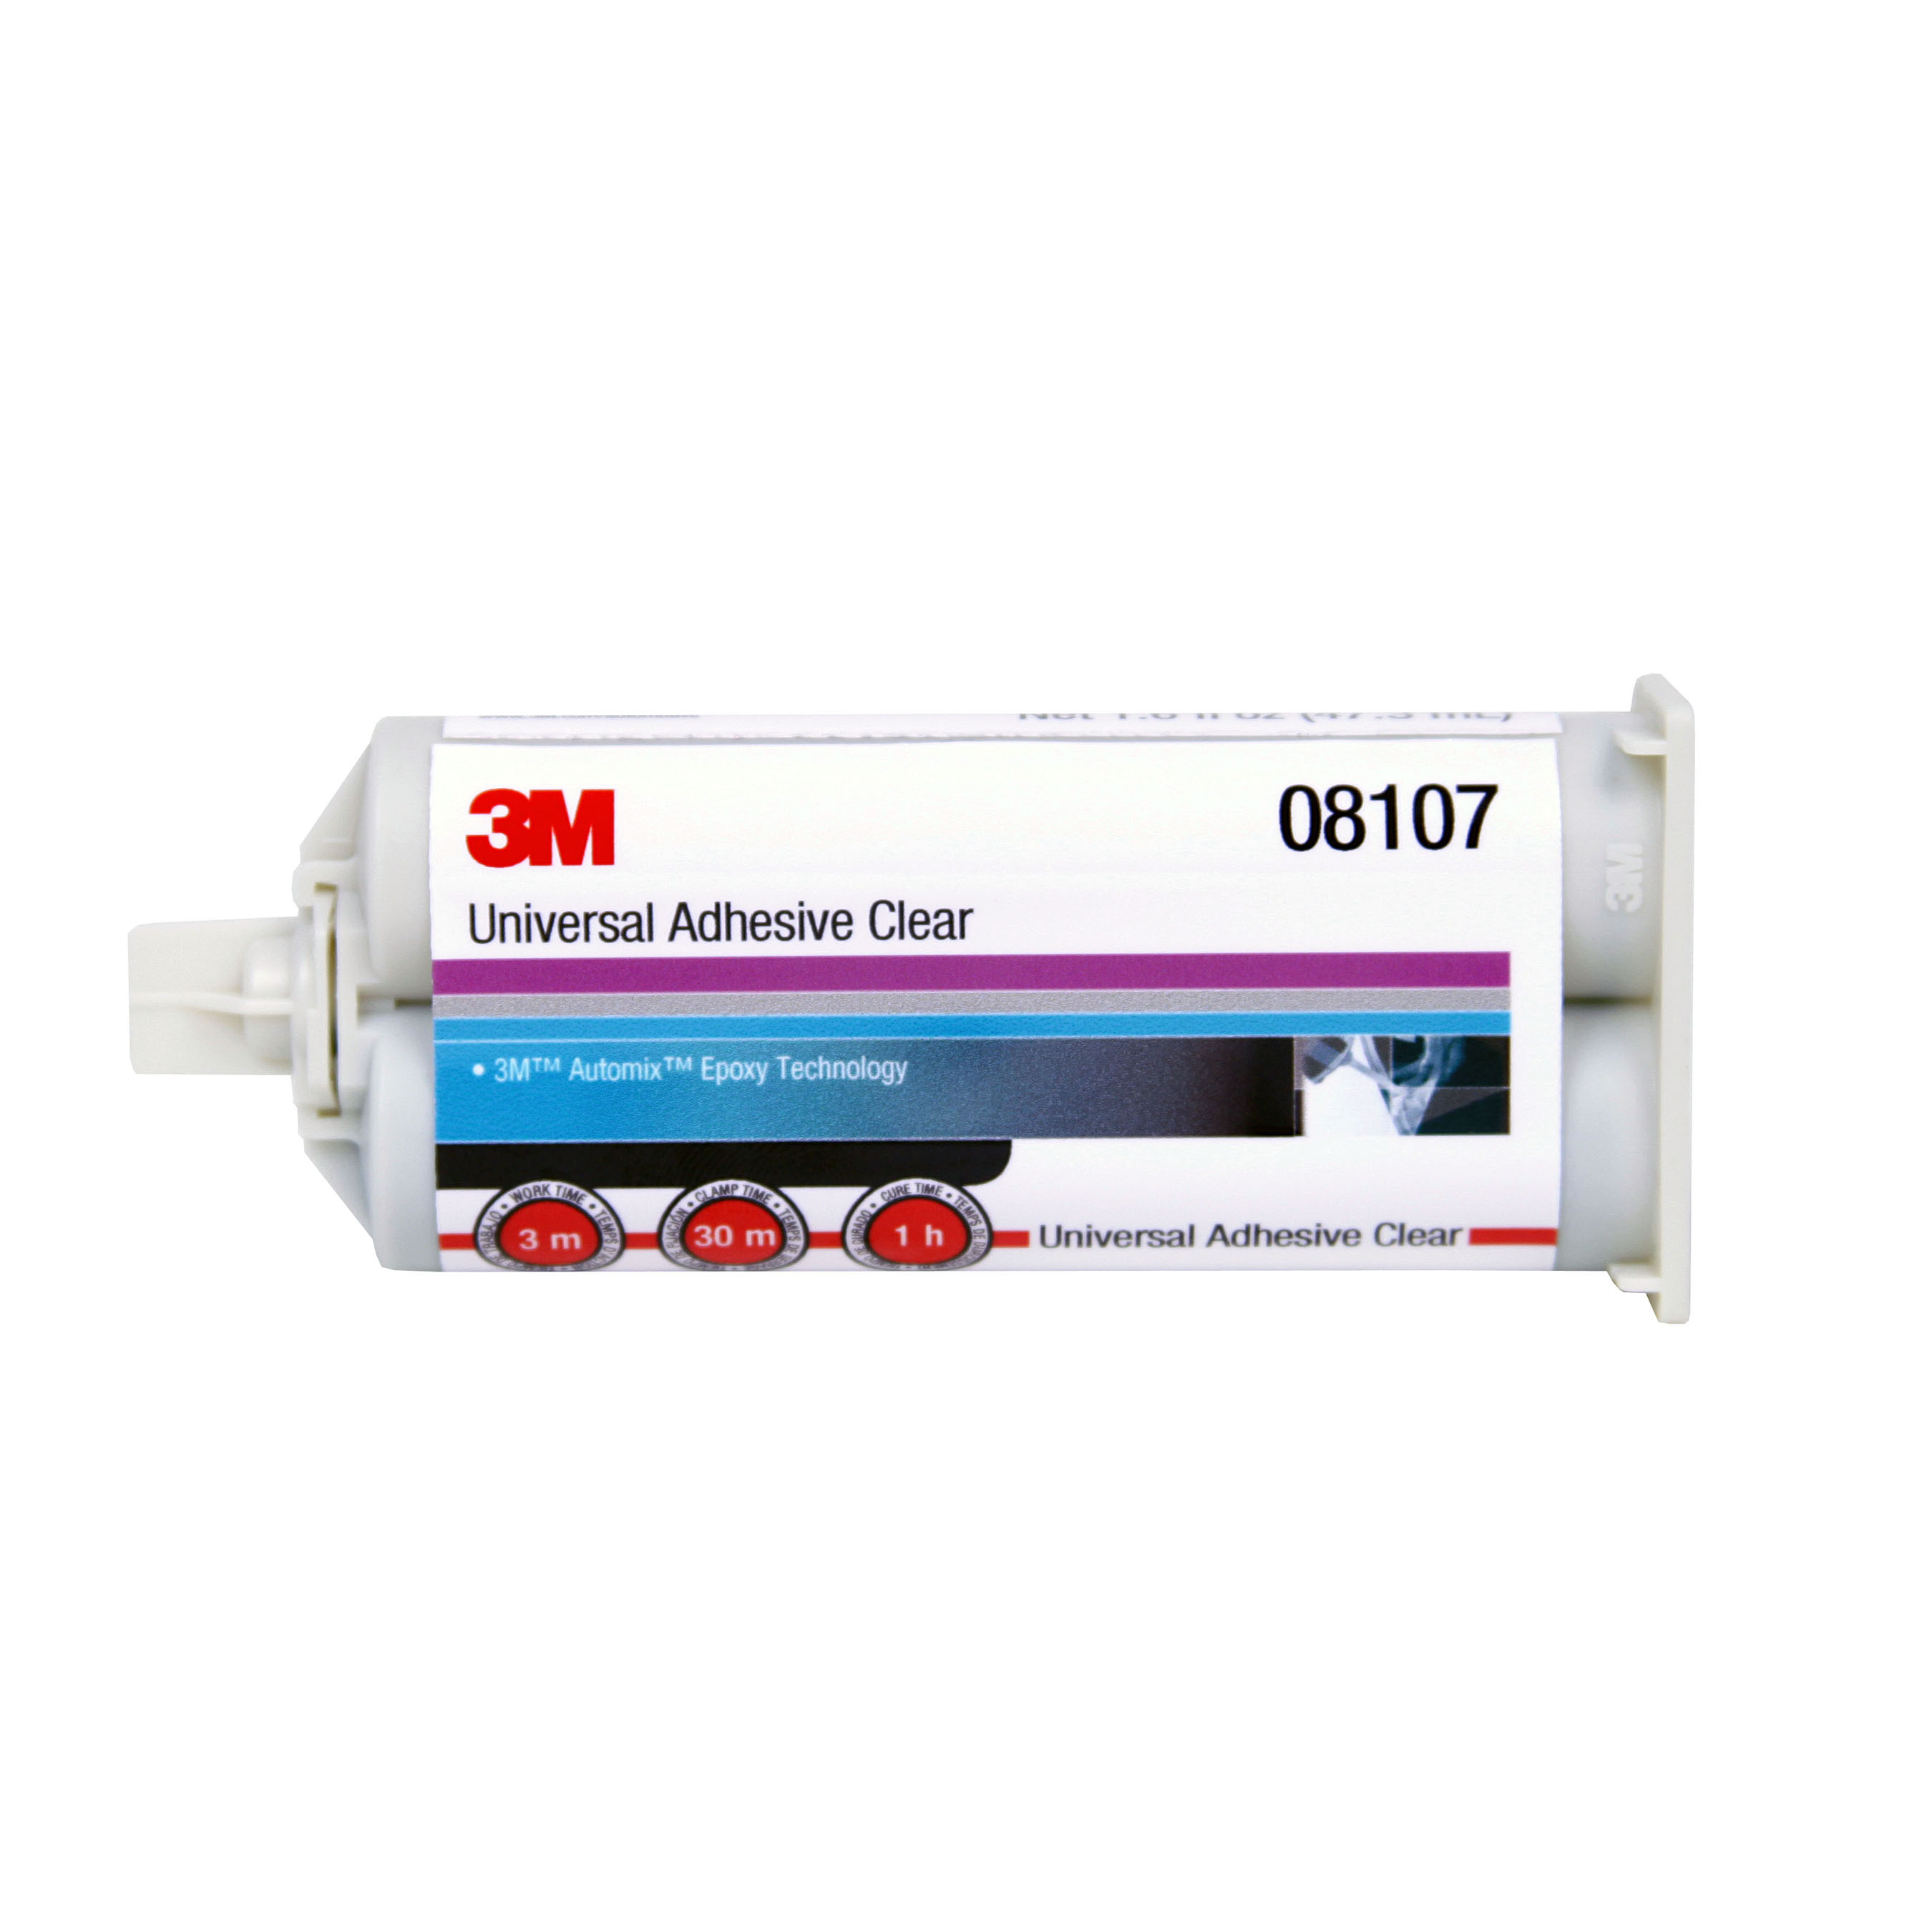 00051135081075 3M™ Universal Adhesive Clear, 08107, 47.3 mL Cartridge,  per case Aircraft products 3M 9352861